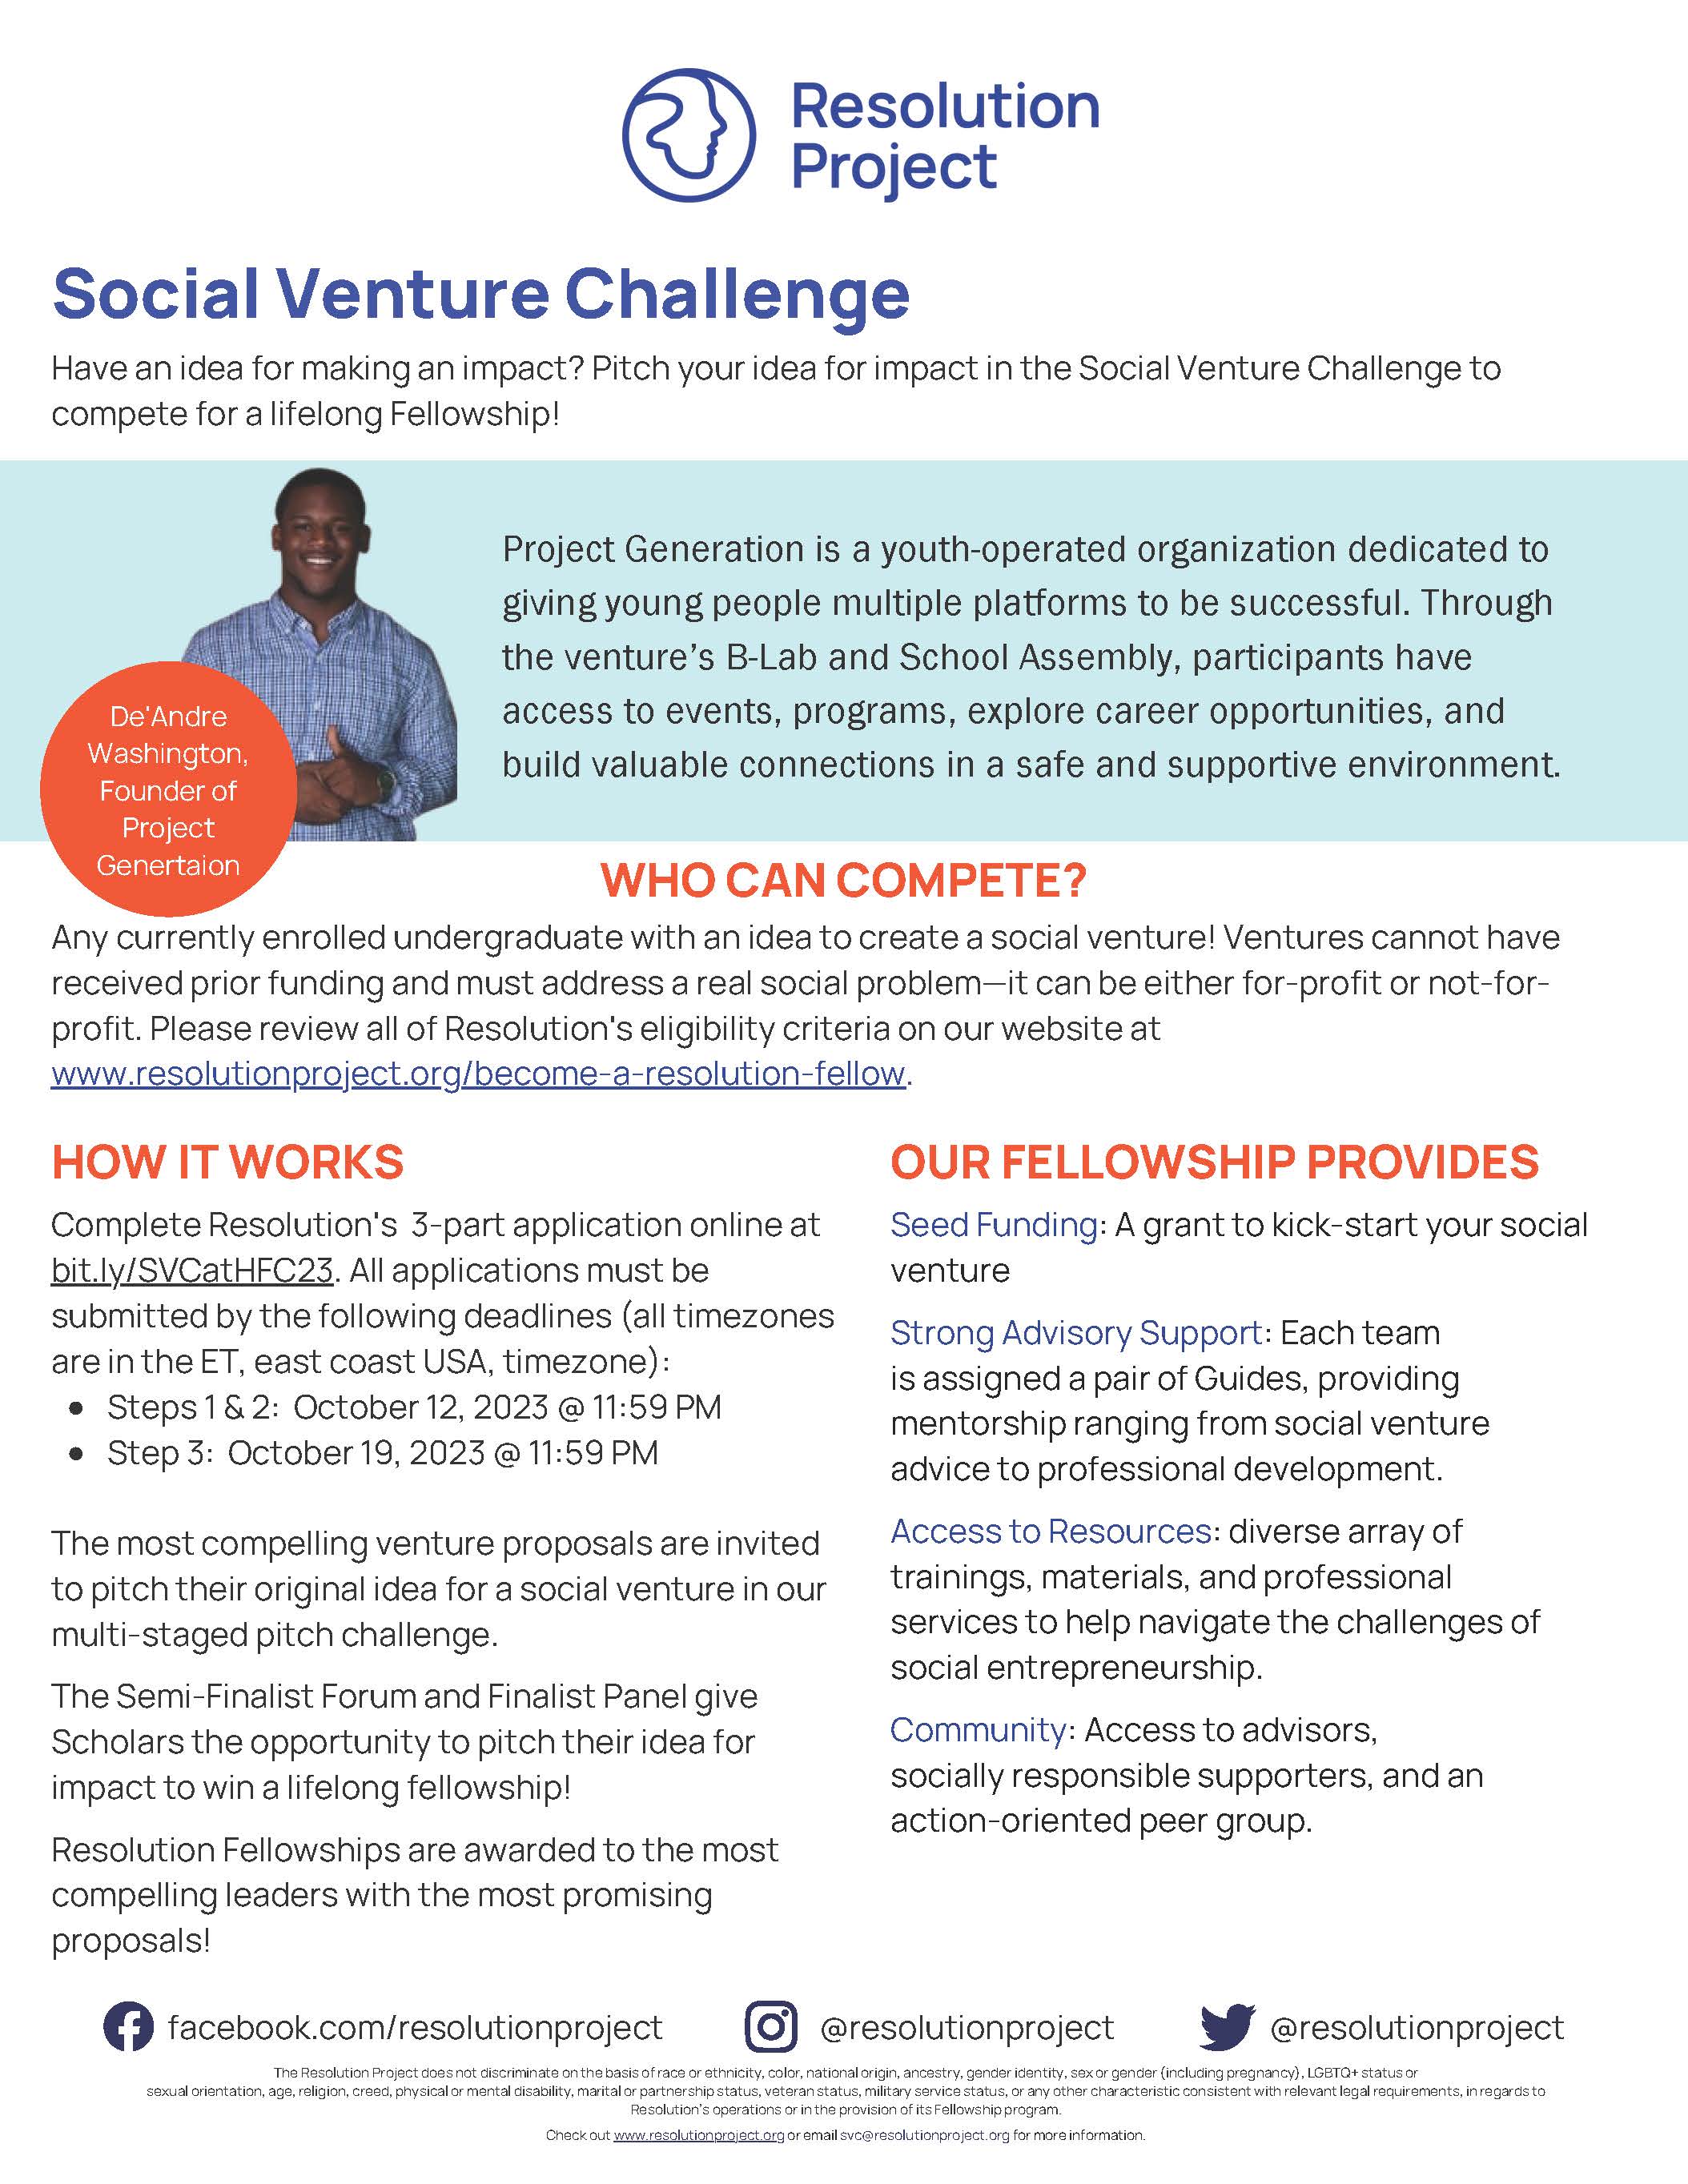 Social Venture Challenge Fast Facts